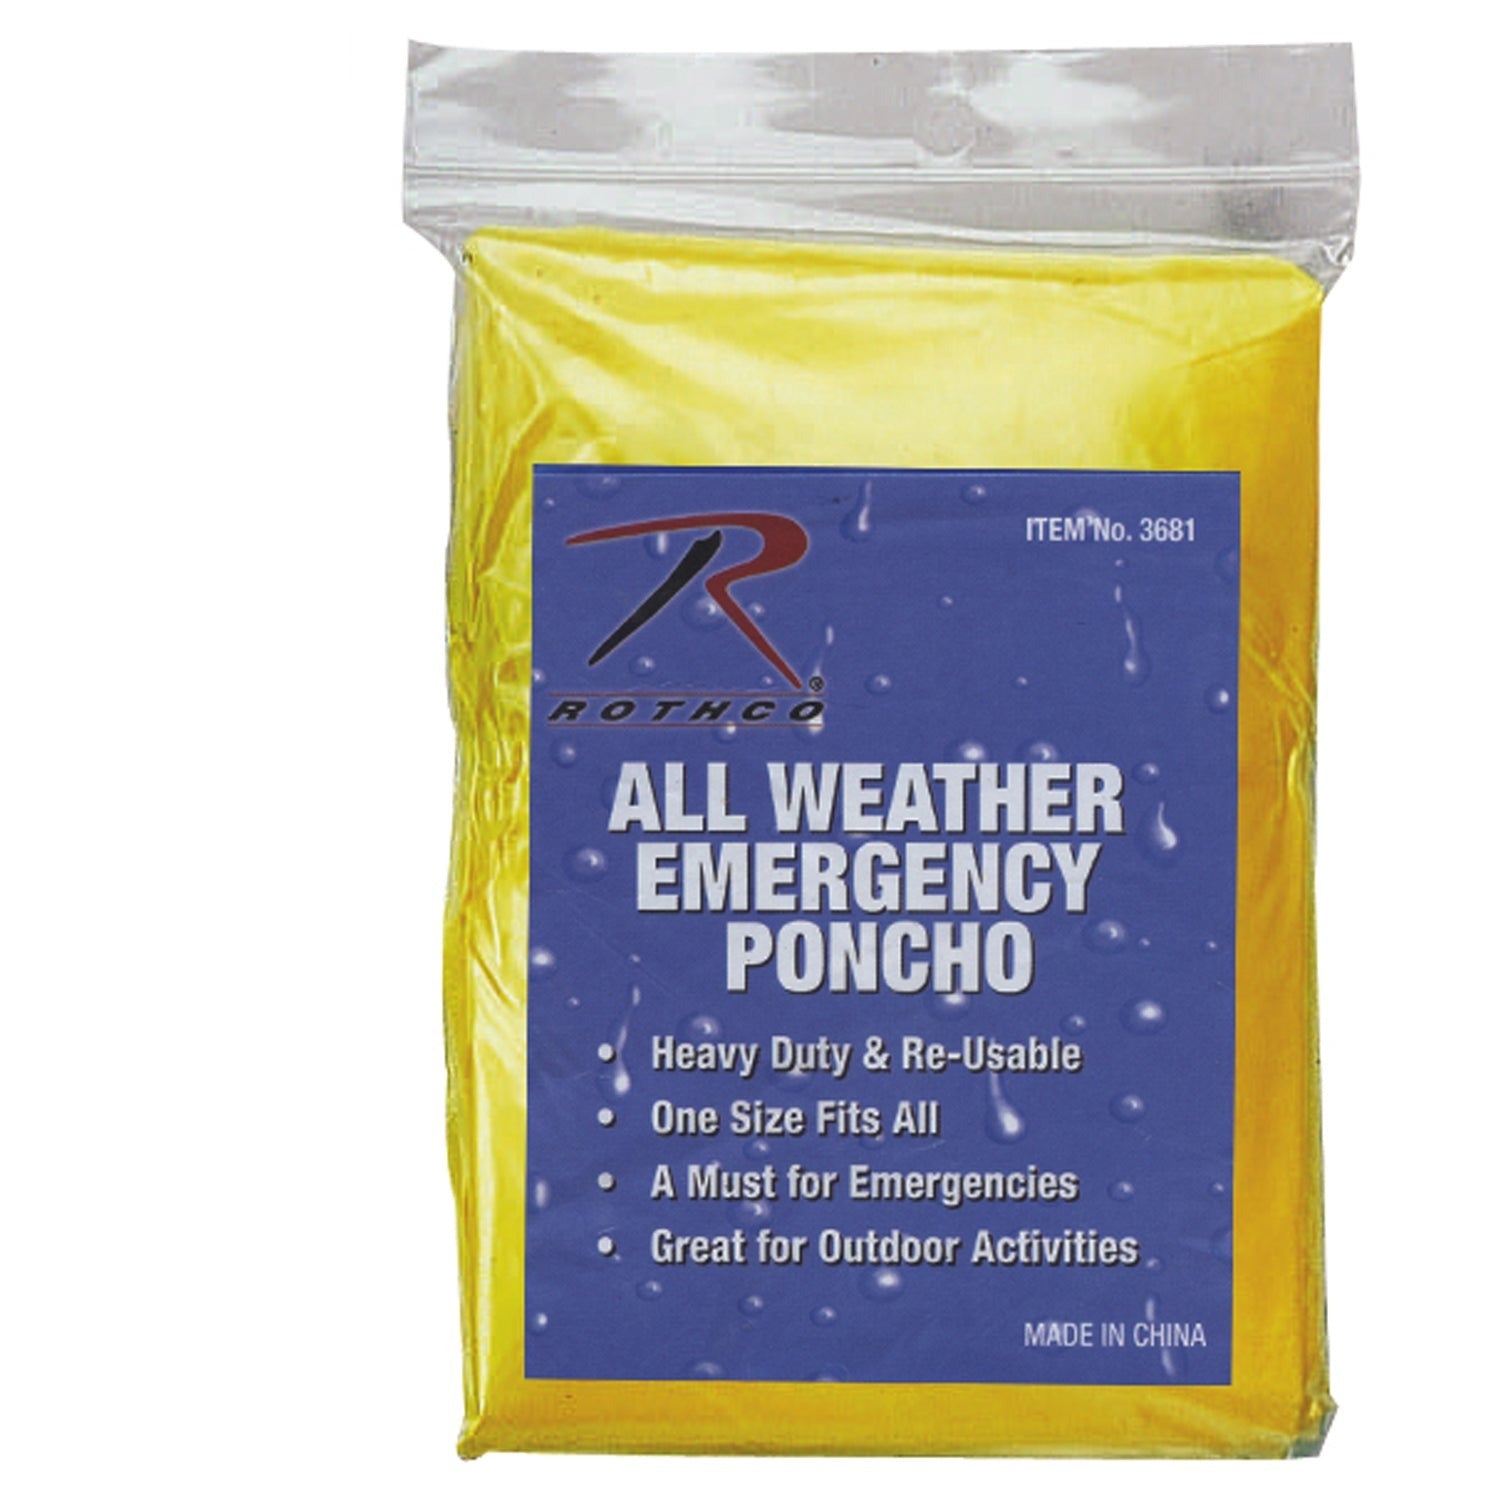 All Weather Emergency Poncho - Tactical Choice Plus